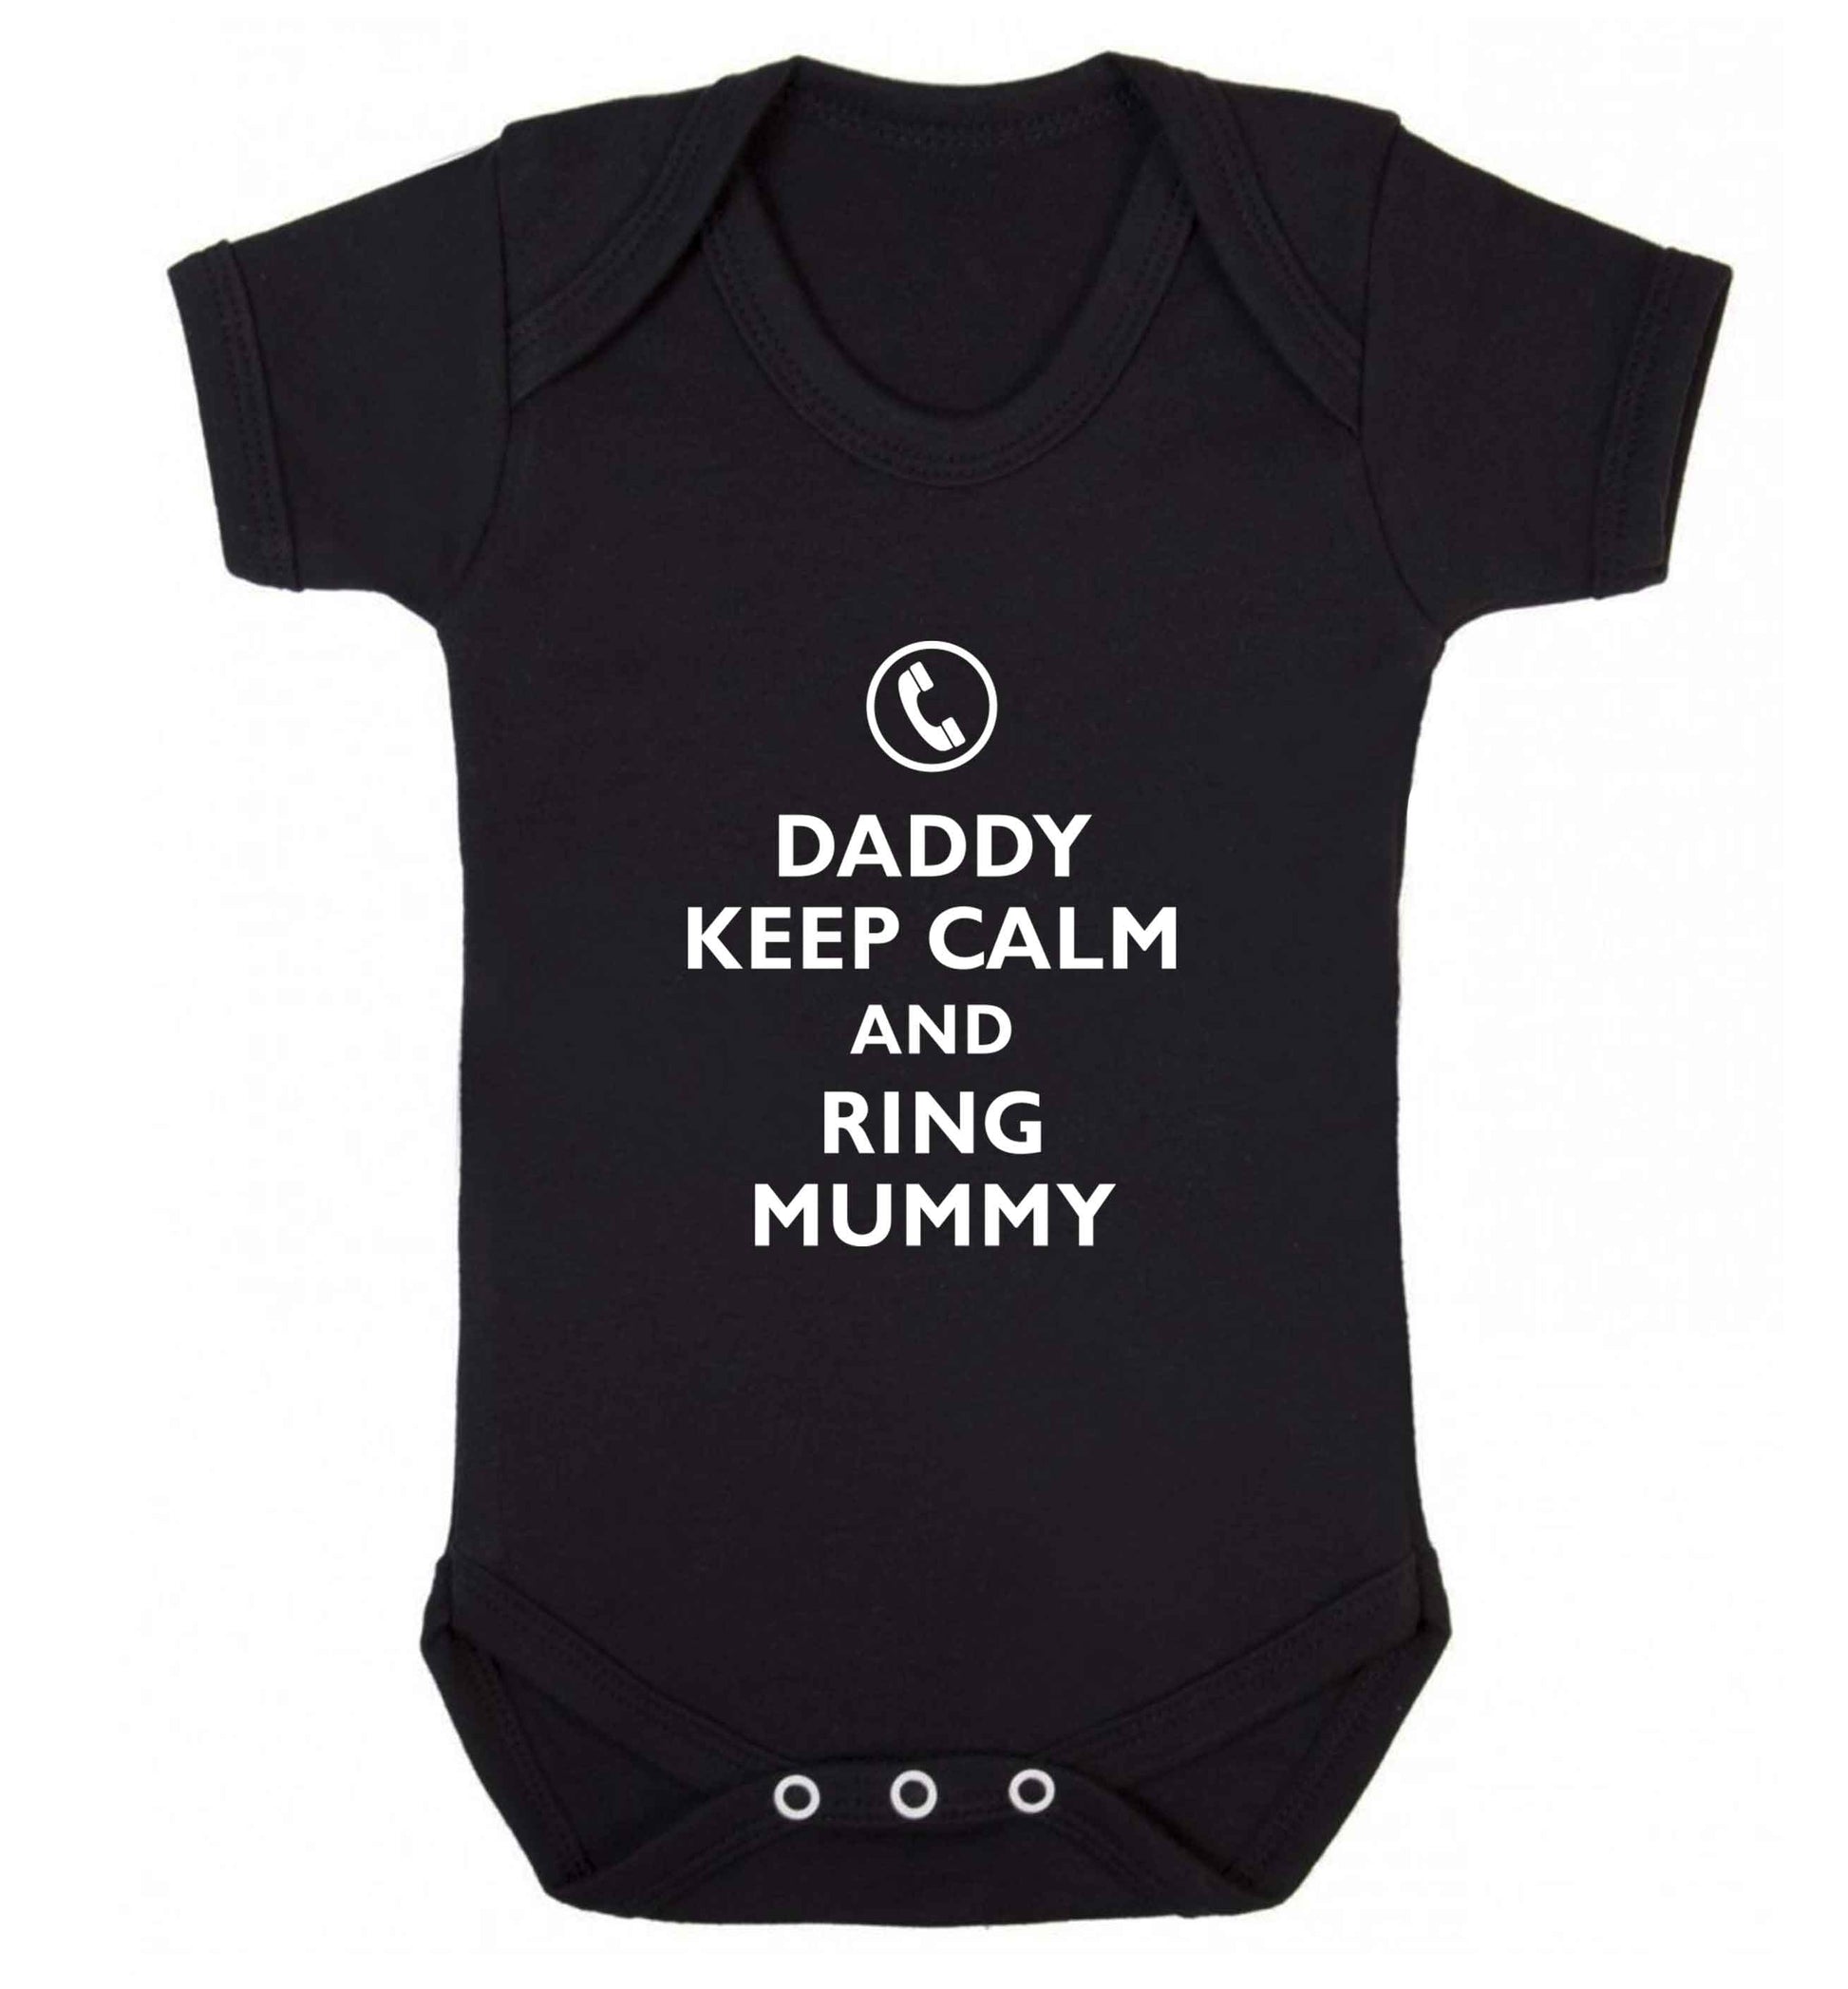 Daddy keep calm and ring mummy baby vest black 18-24 months